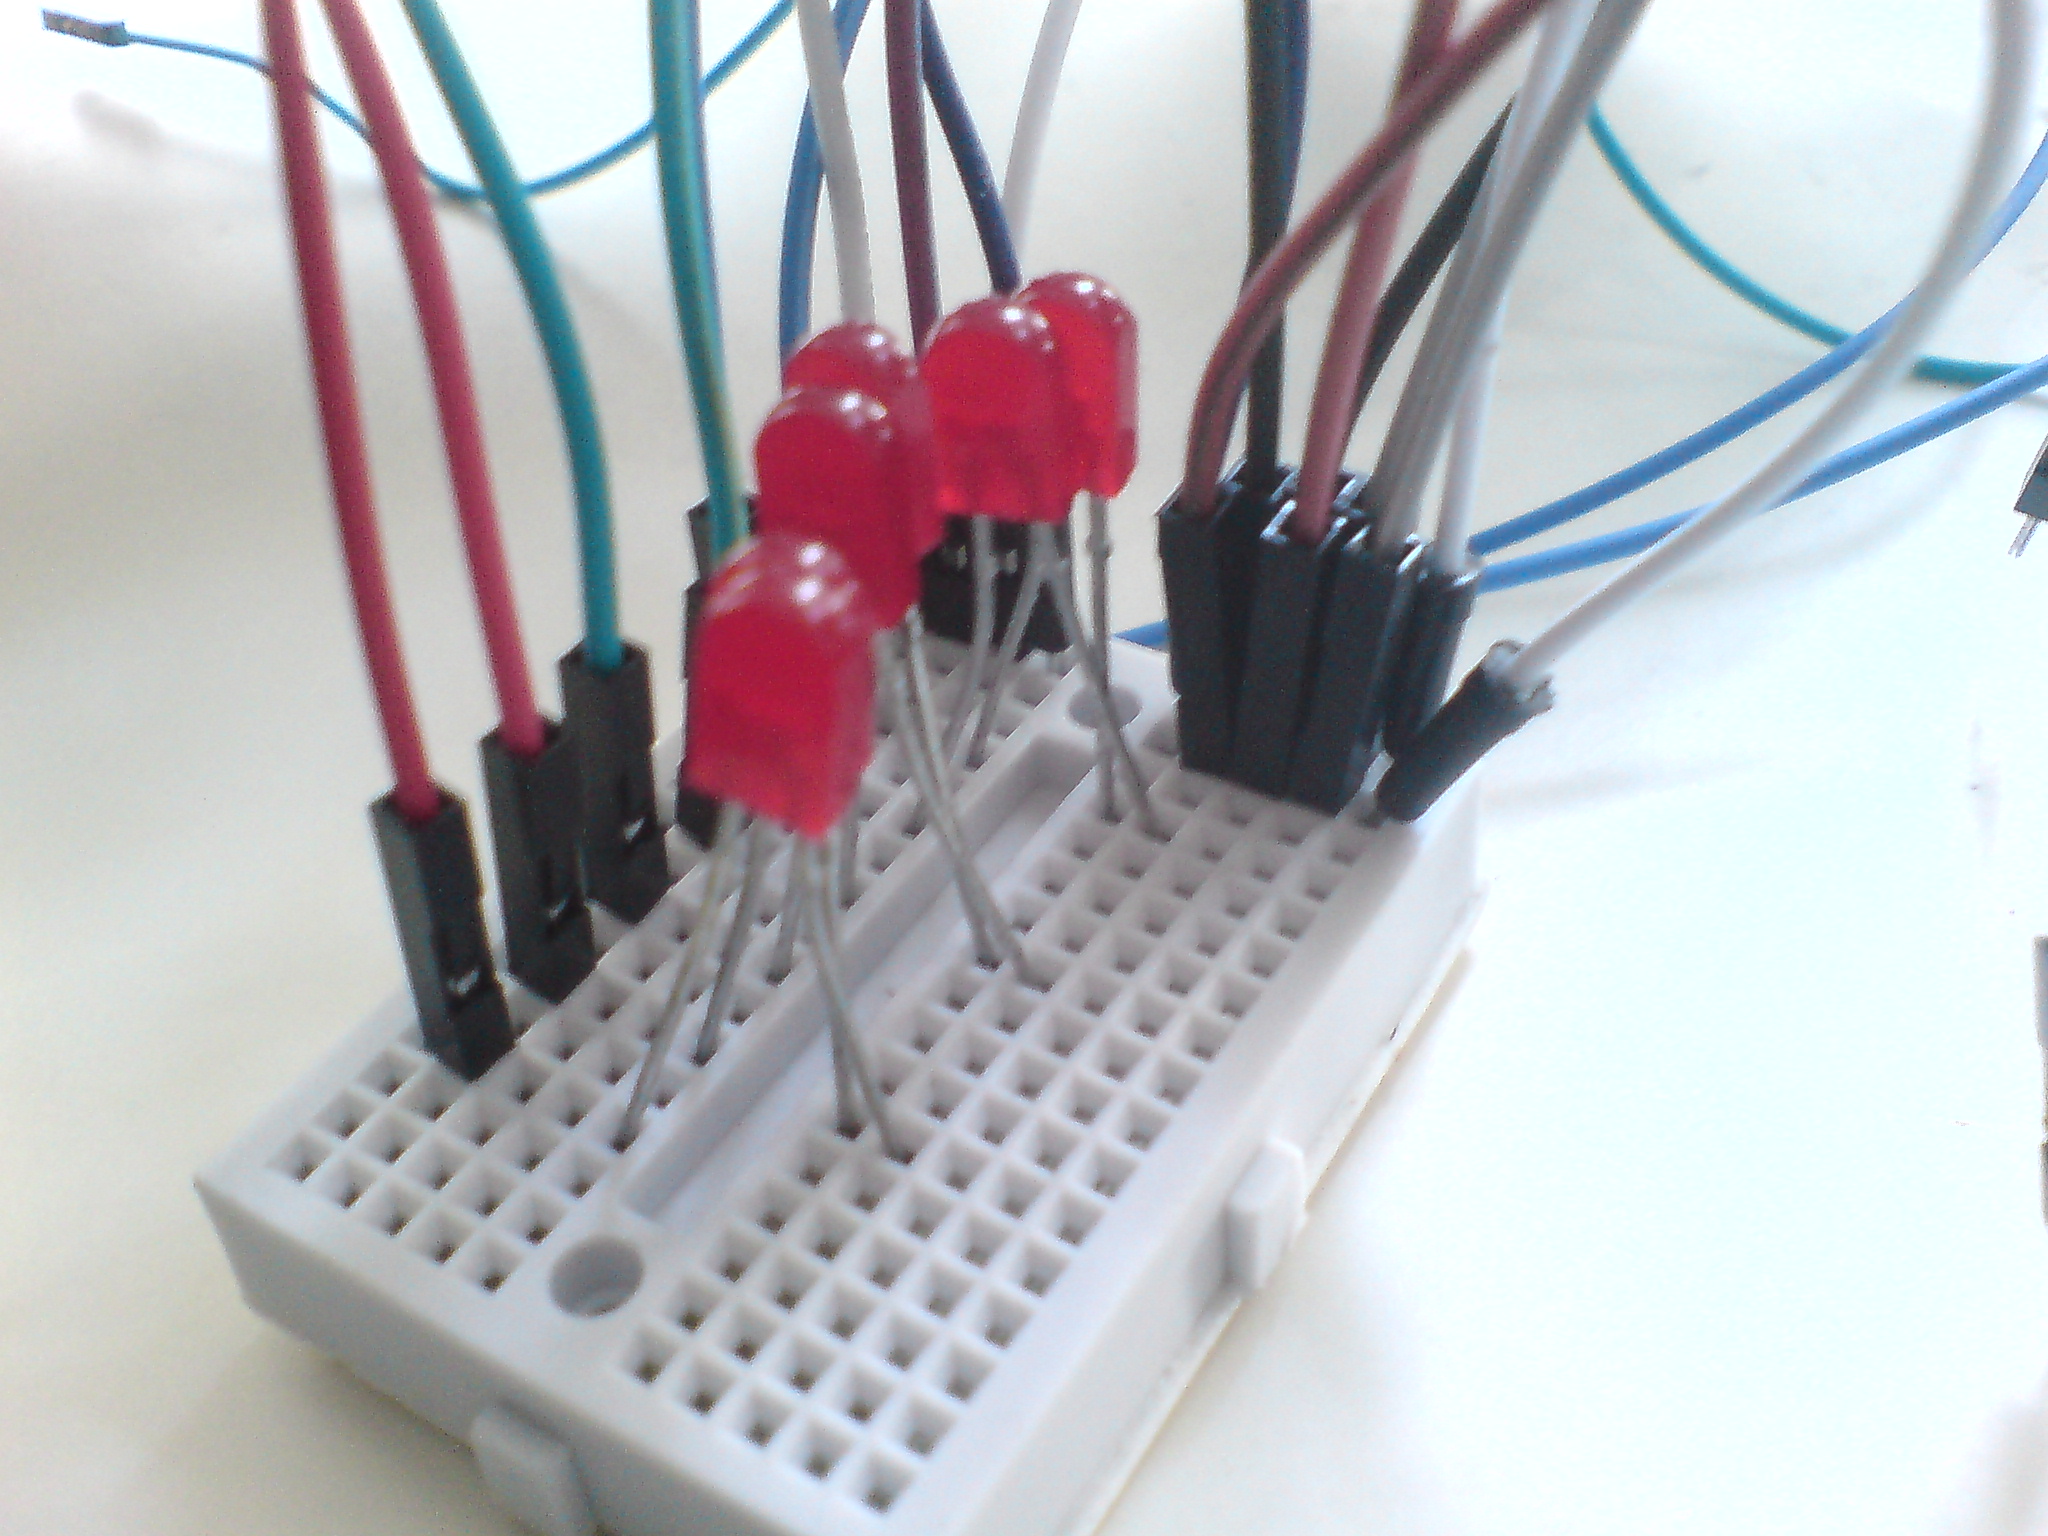 Connect the ground terminal to breadboard